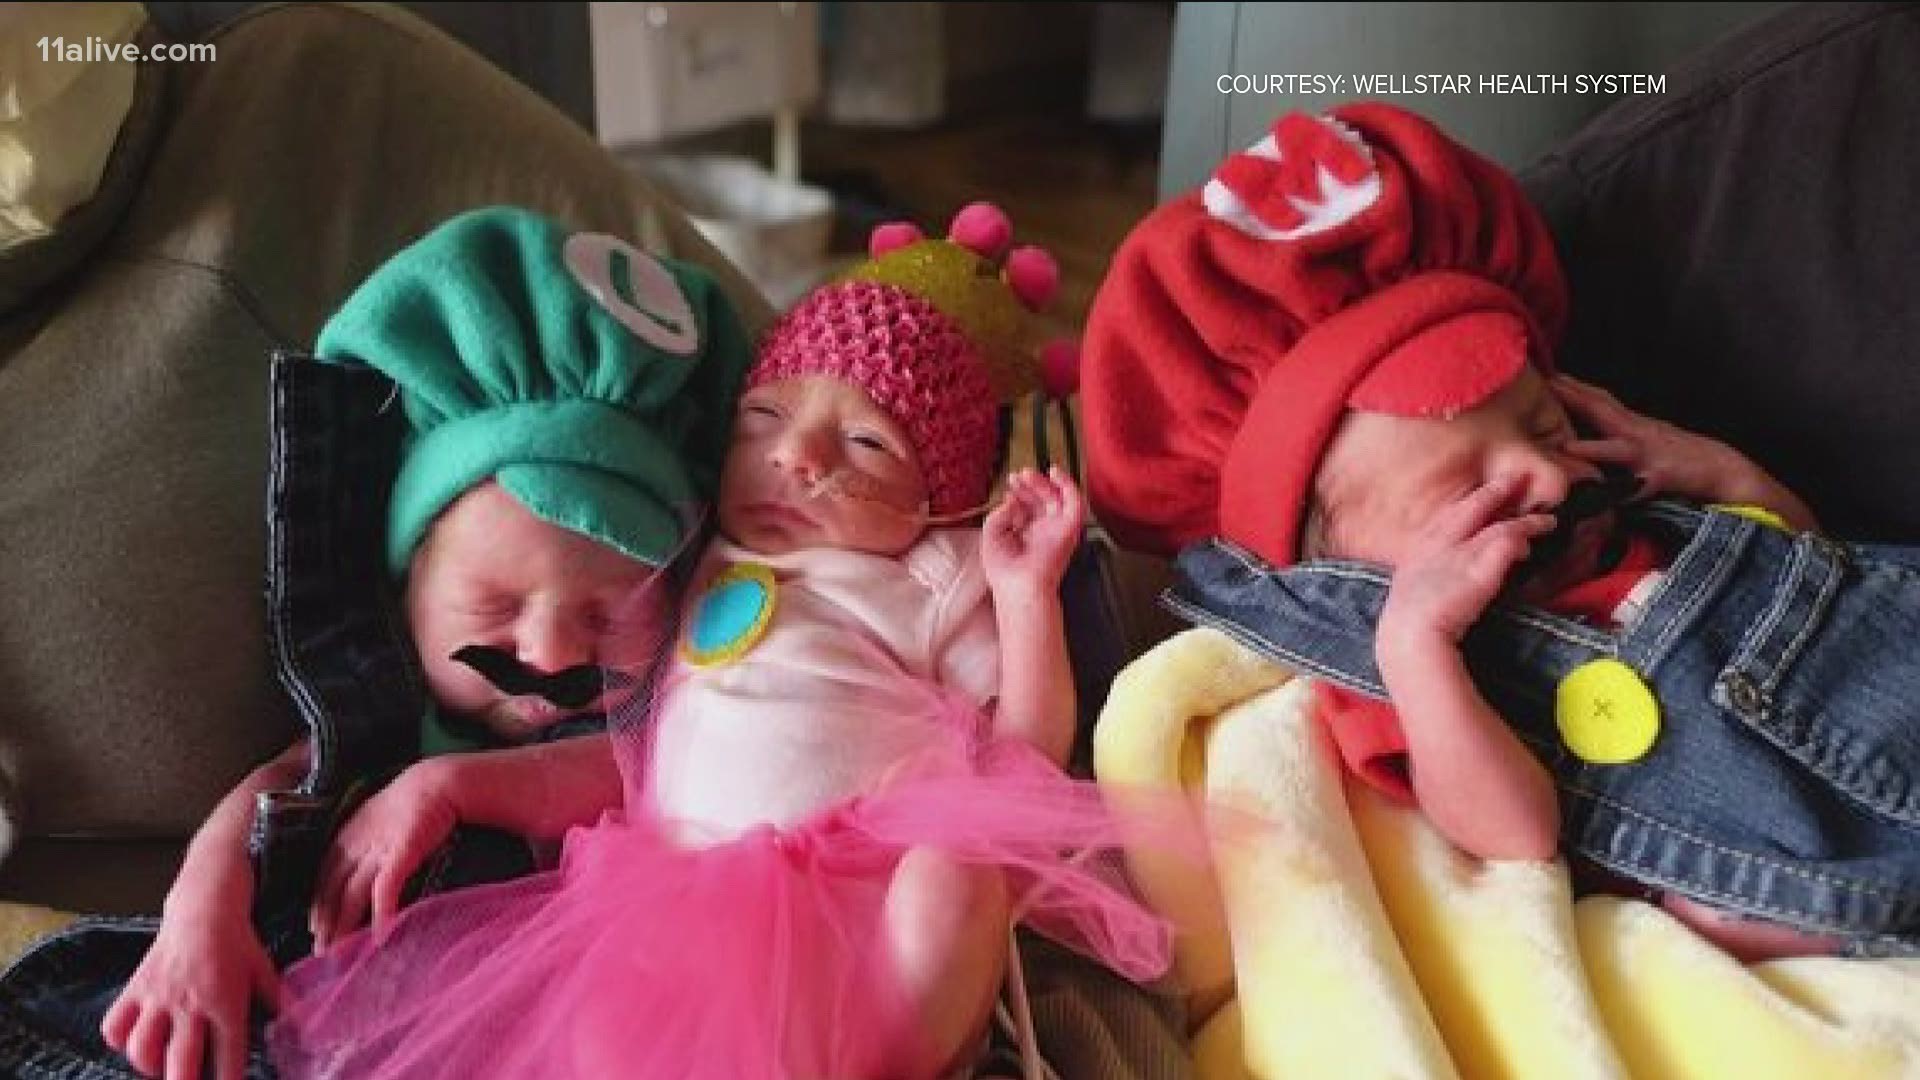 NICU babies dressed as pumpkins, mermaids and ghosts are bringing joy to families for the holiday.